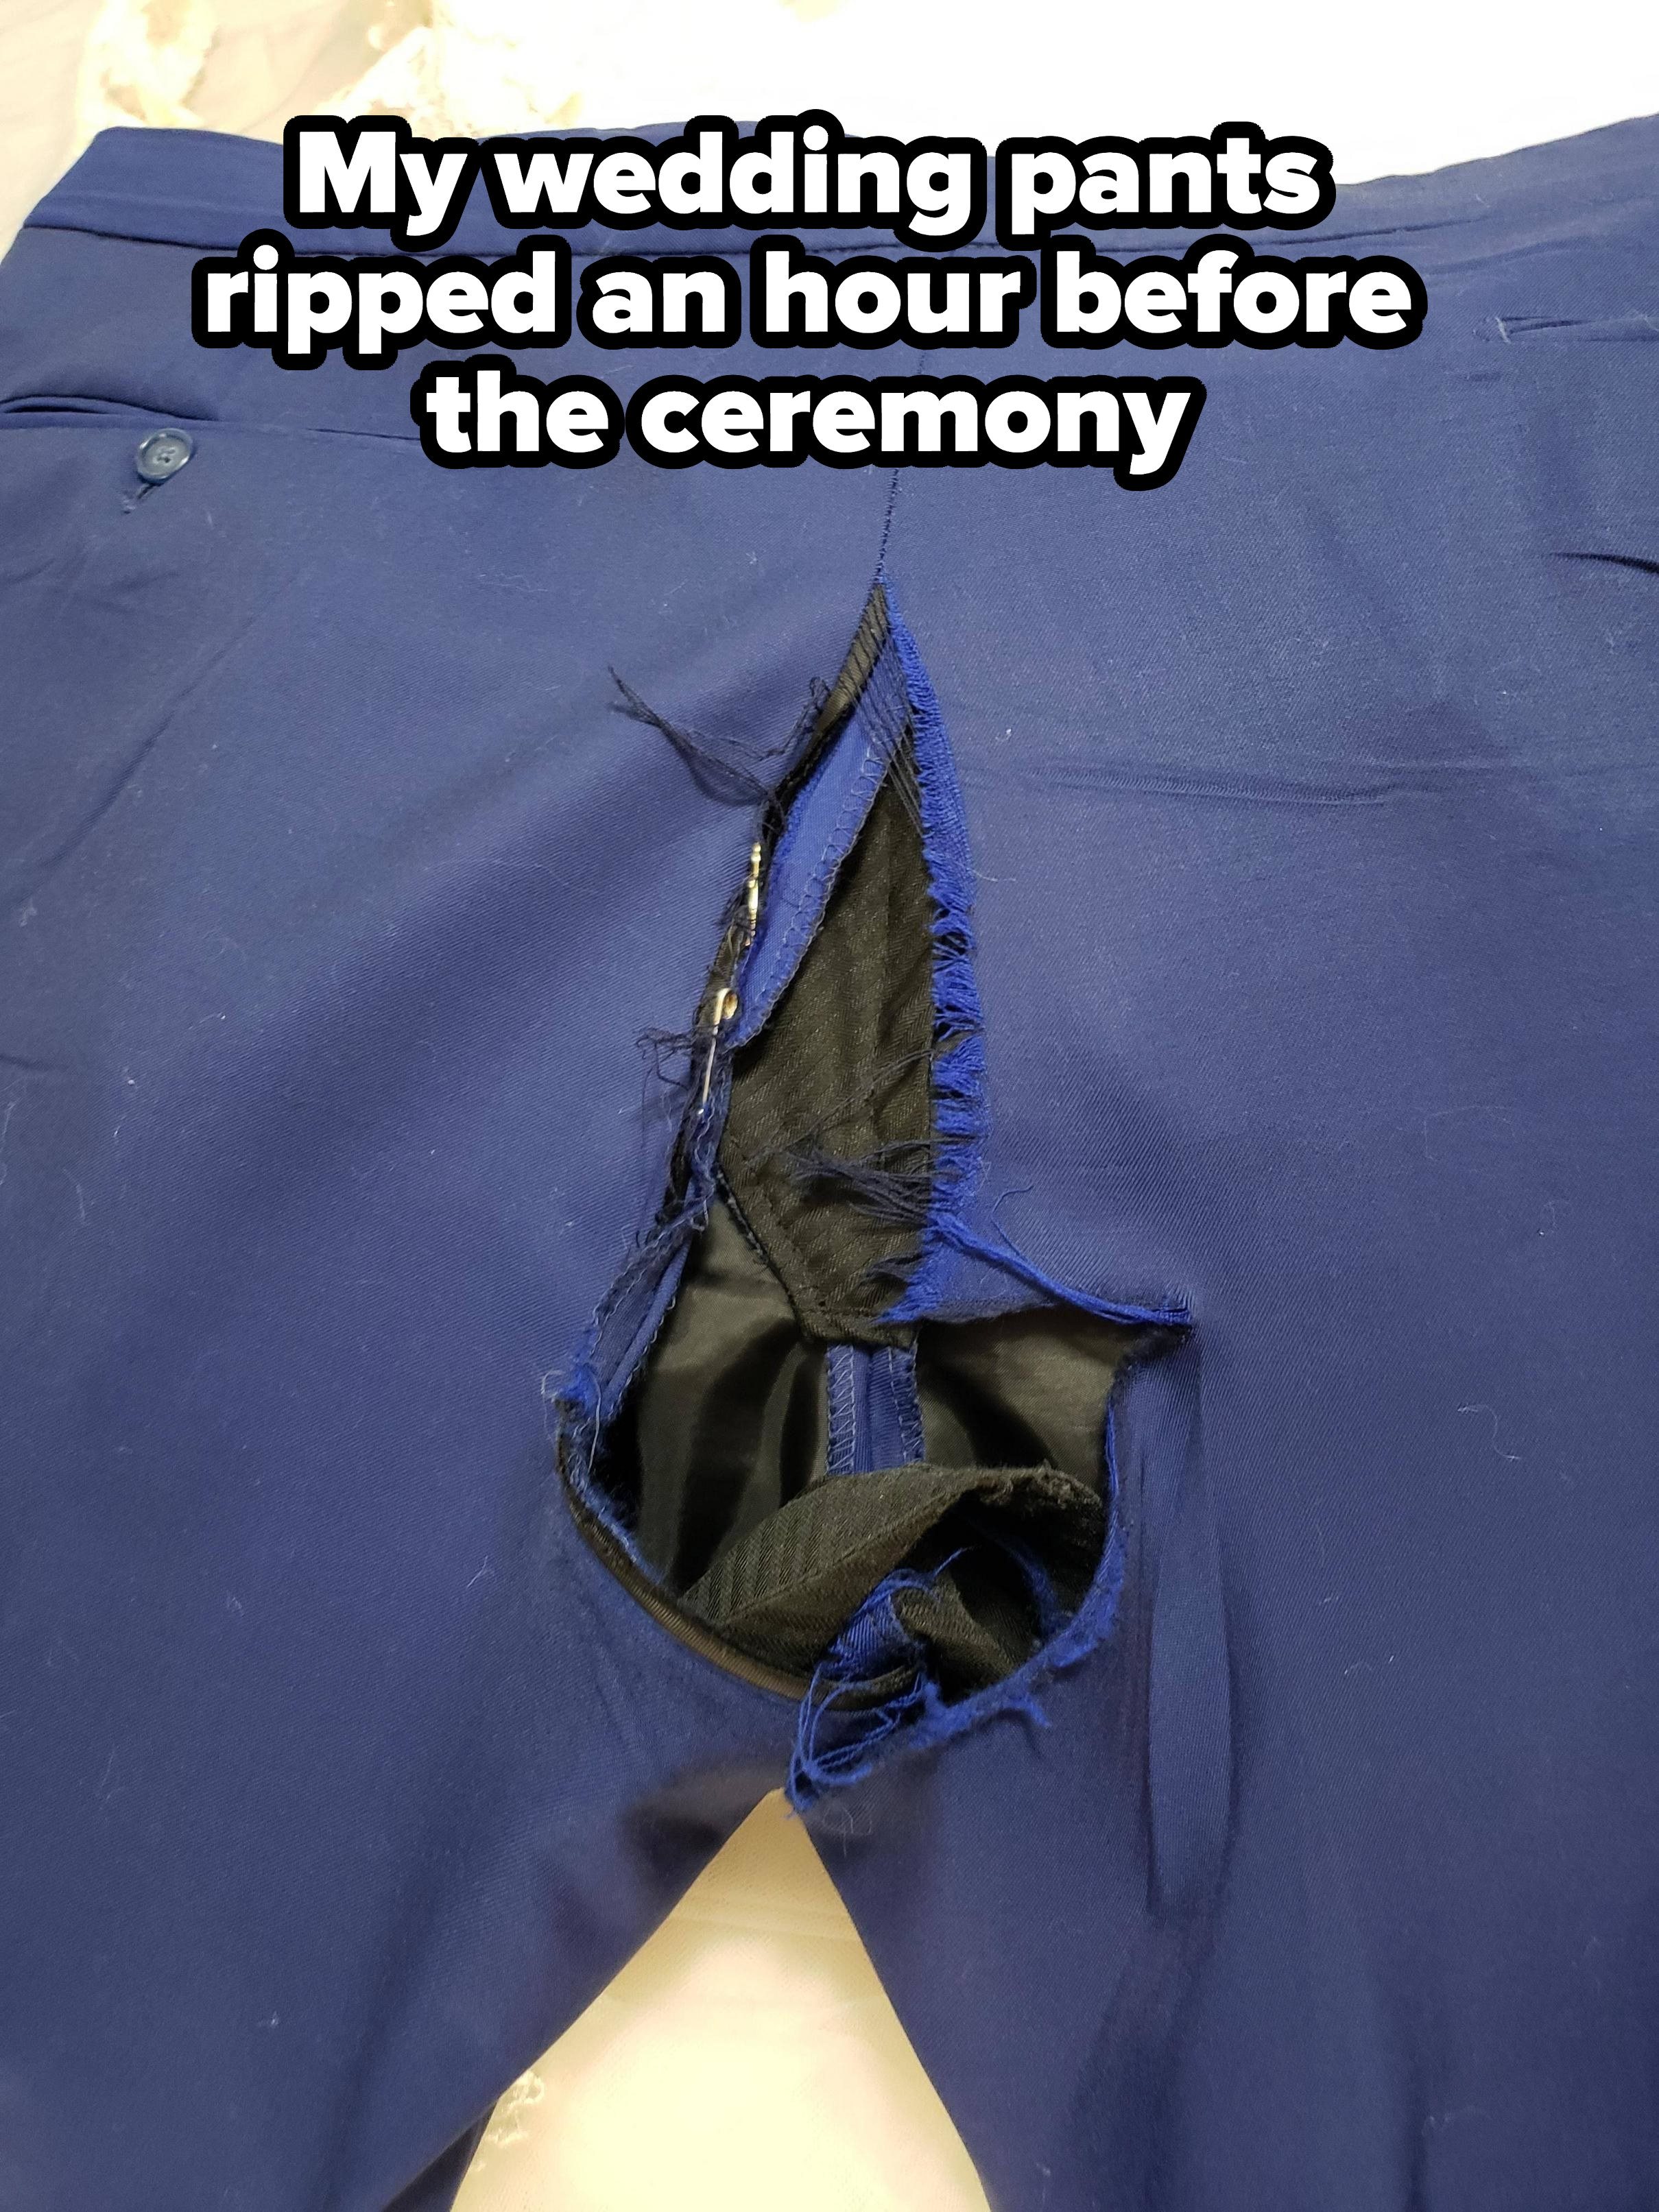 Wedding pants that ripped an hour before the ceremony